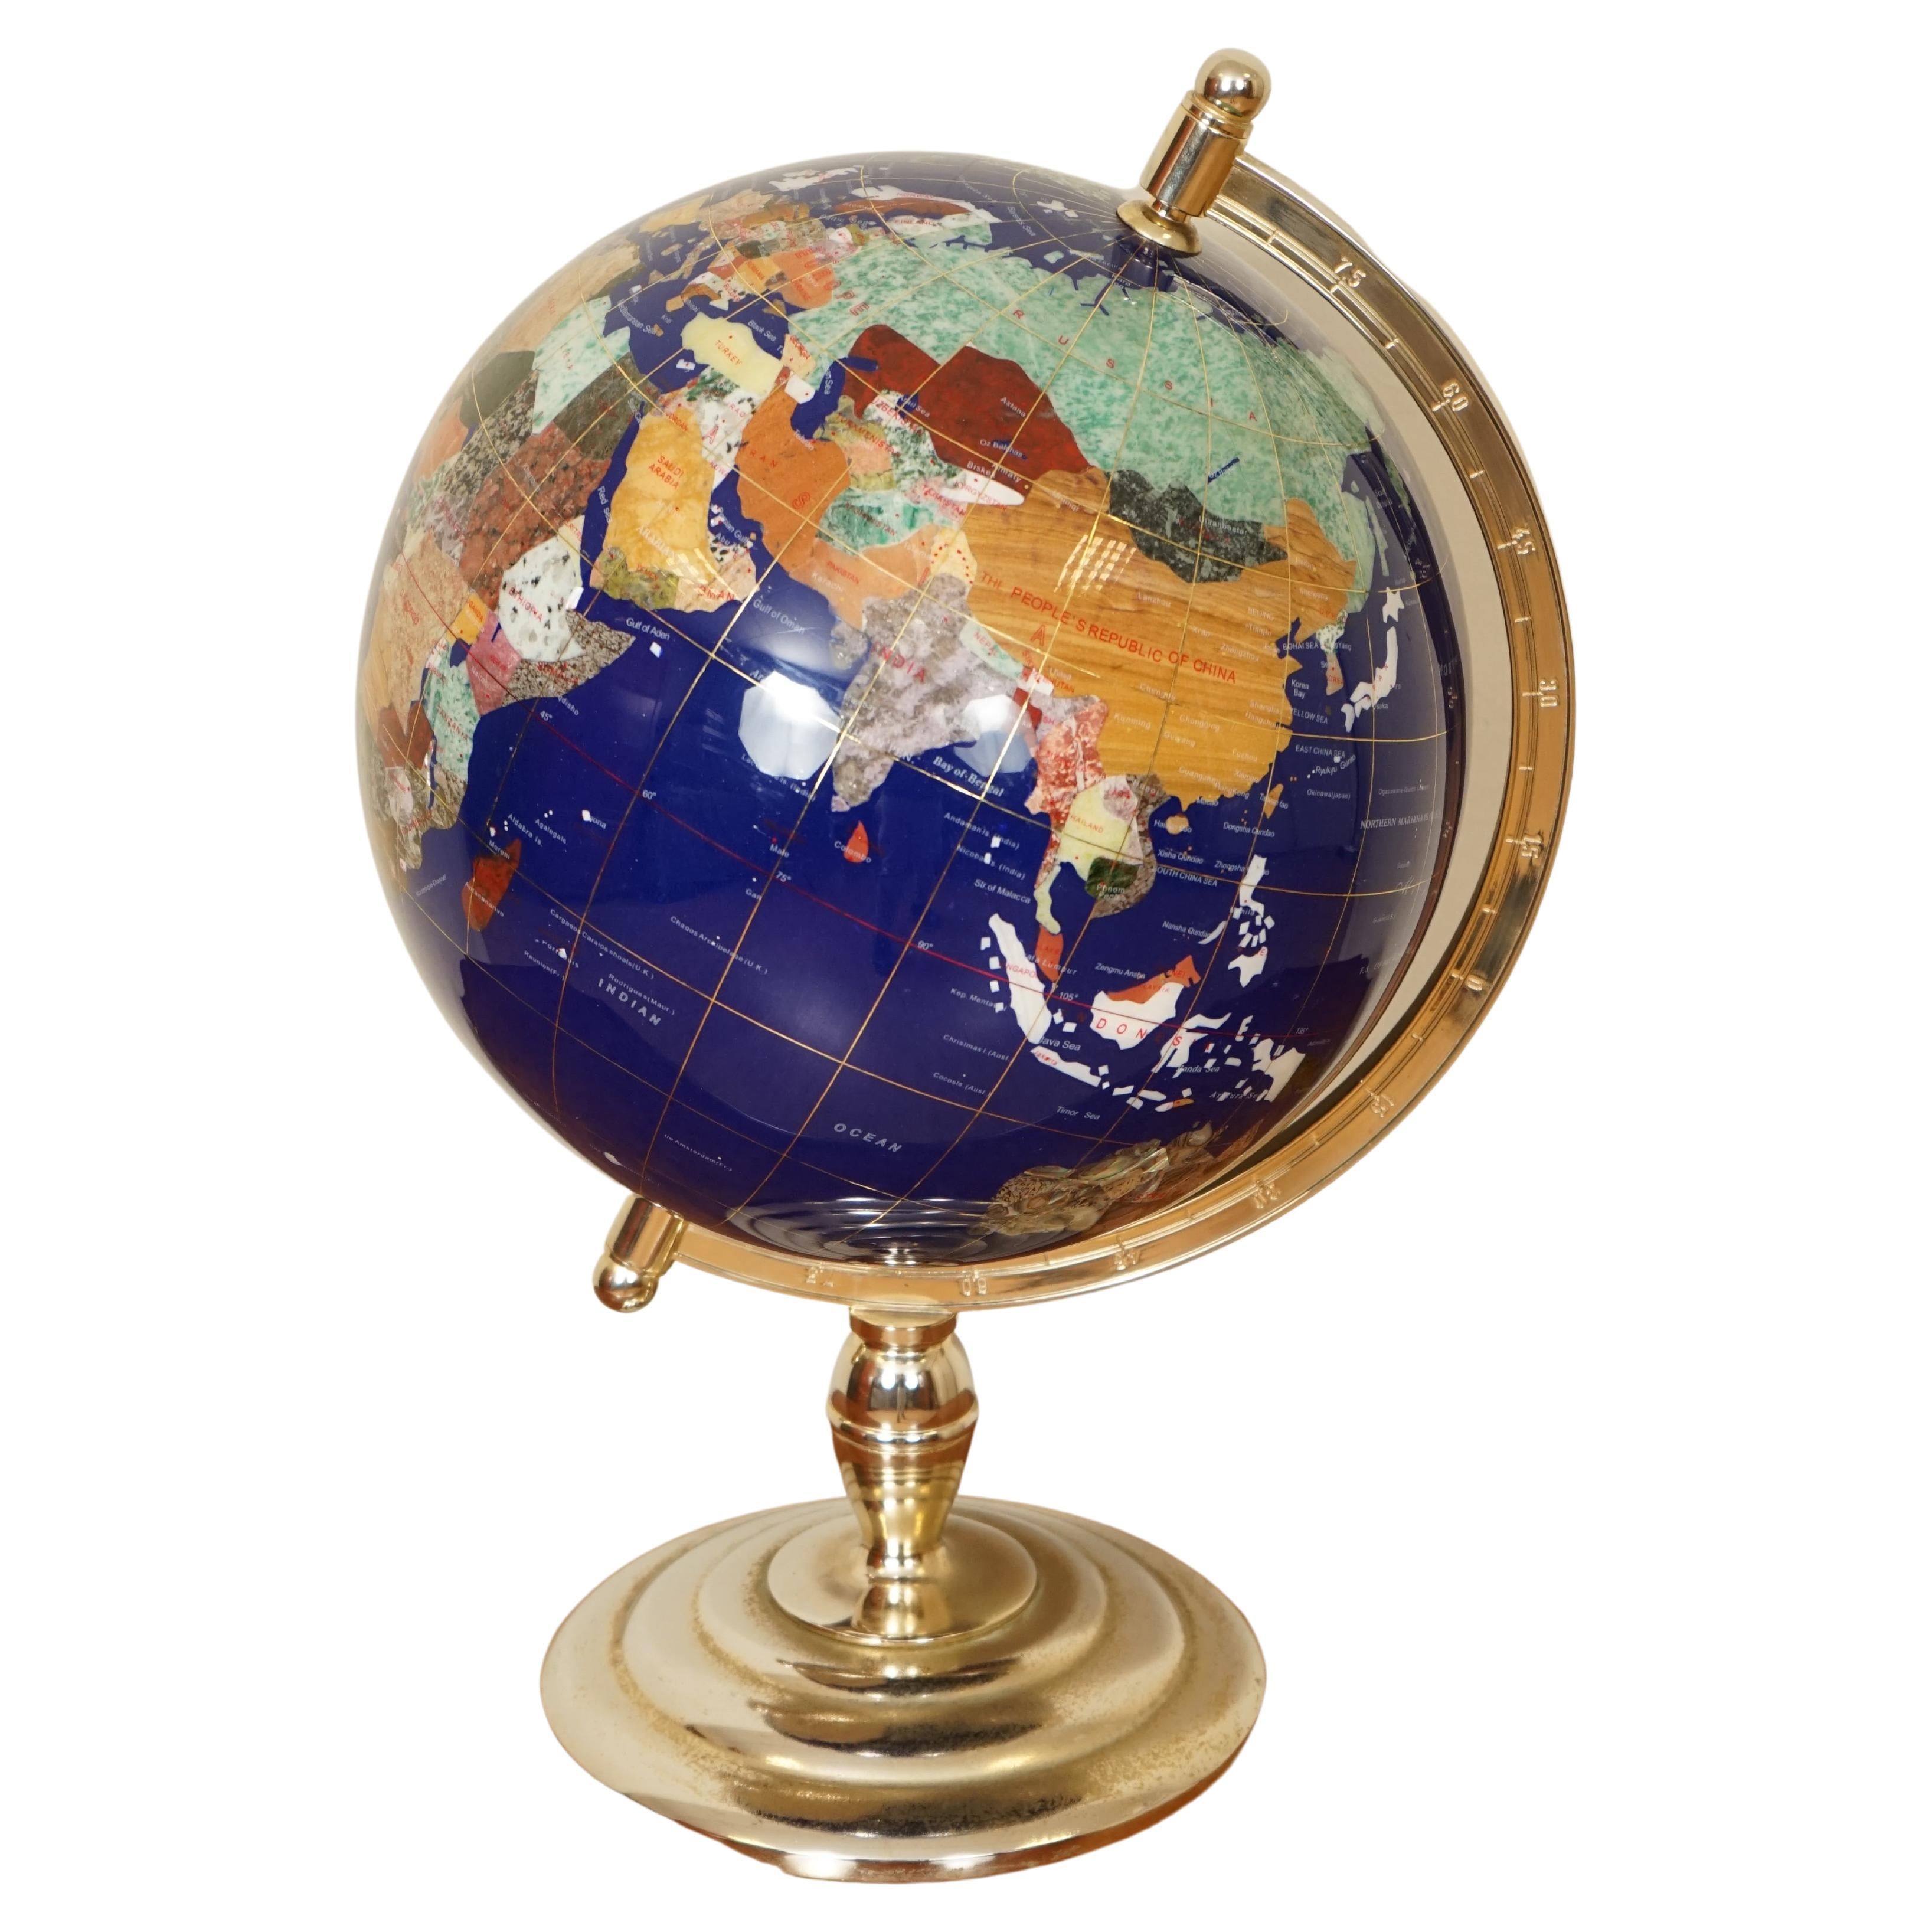 Collectibles Antique World Globe With Leather Tripod Stand Home Decor Gift Item 